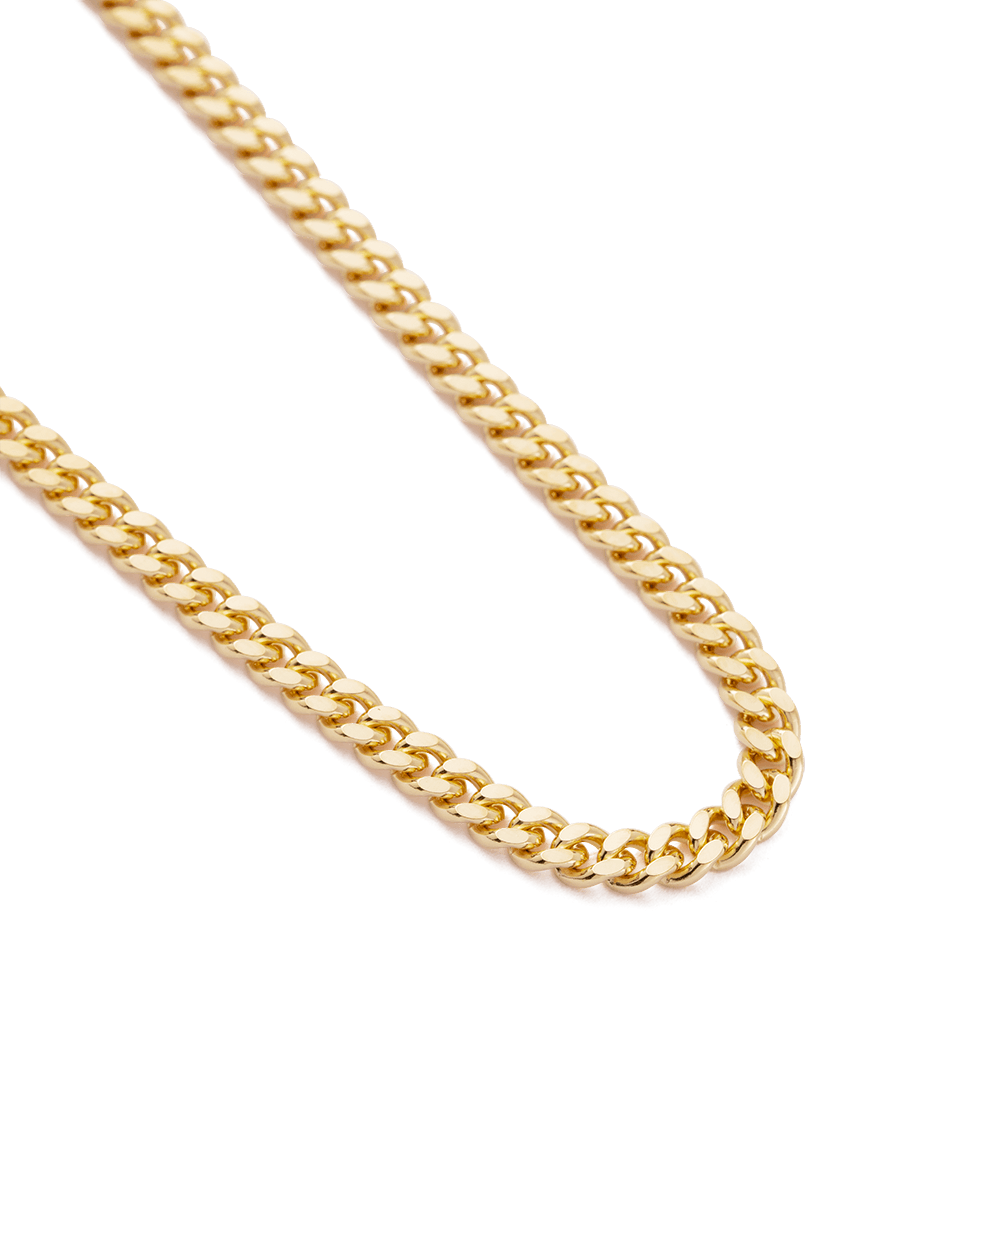 GLOW CHAIN BRACELET (18K GOLD PLATED) - IMAGE 5